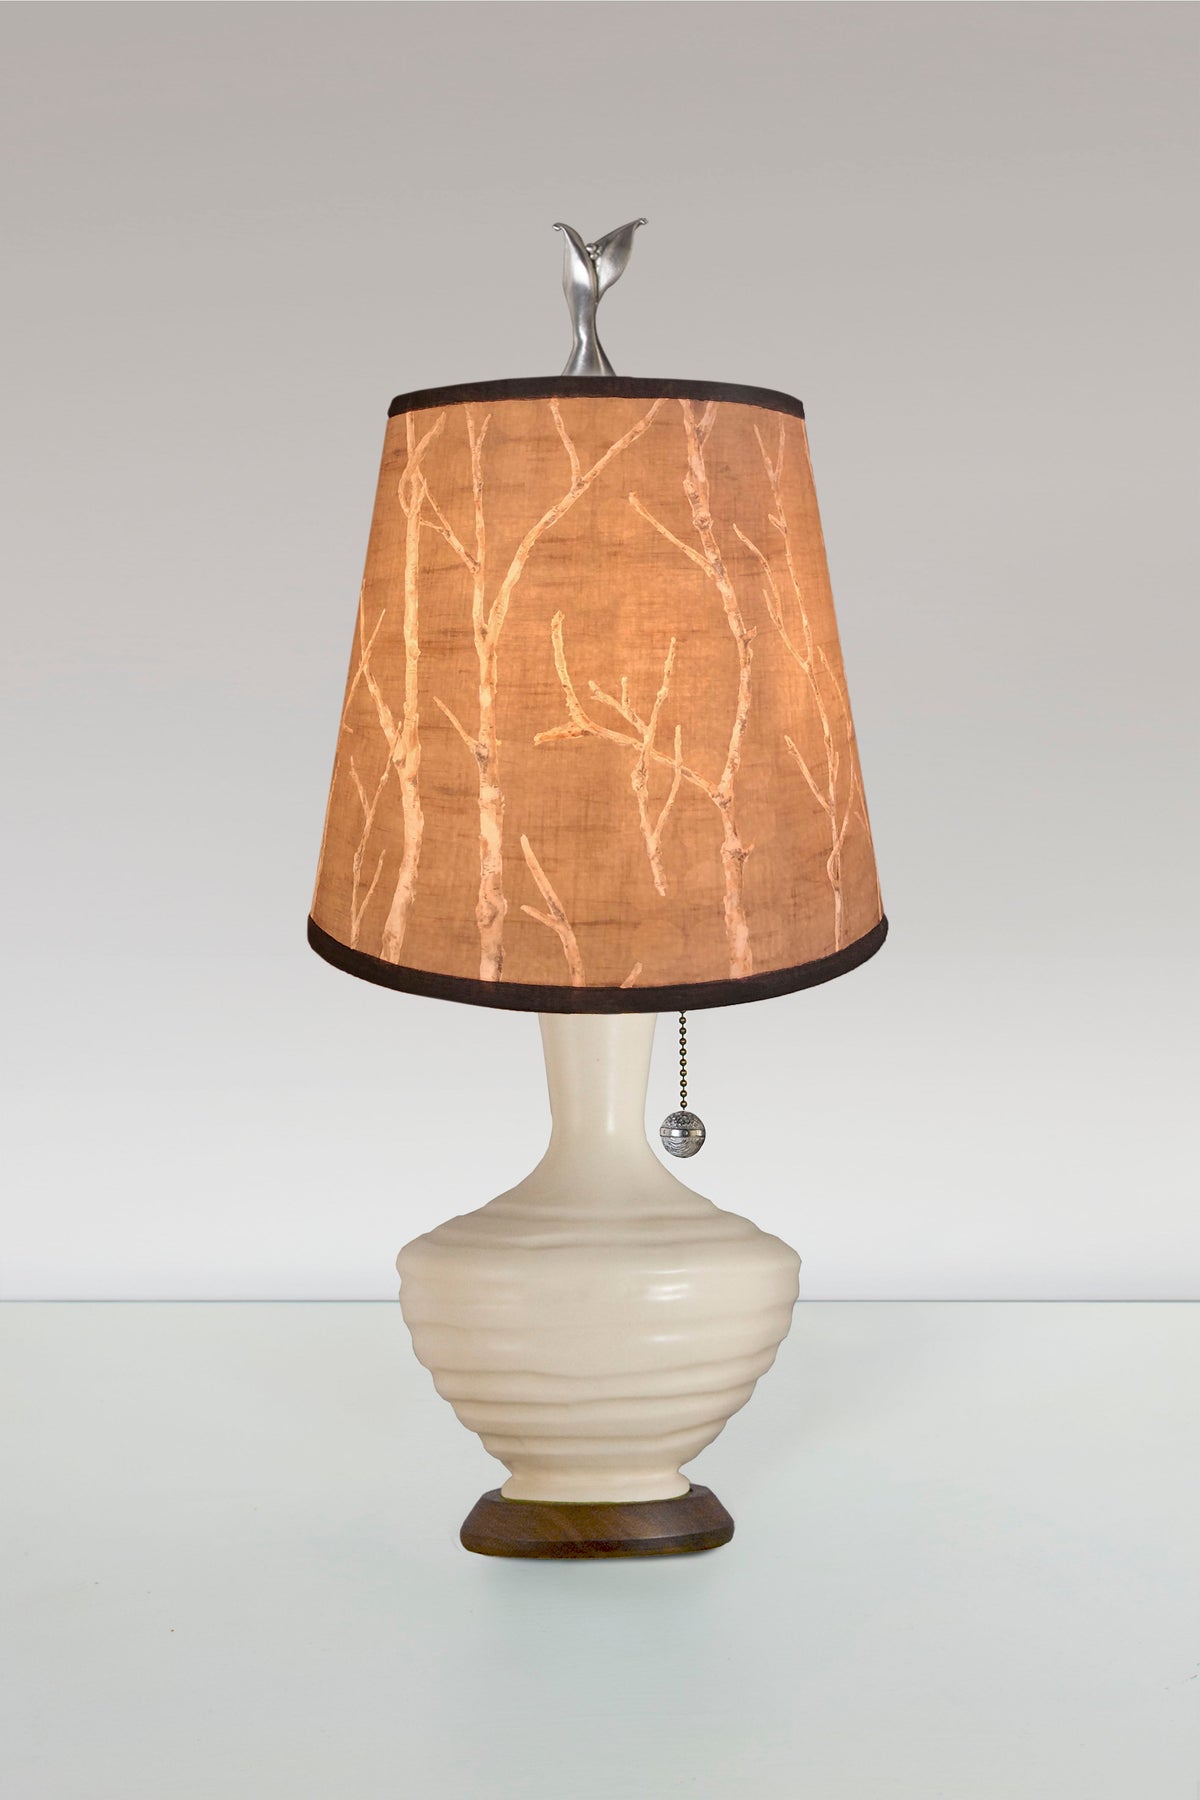 Janna Ugone &amp; Co Table Lamps Ceramic Table Lamp in Ivory Glaze with Small Drum Shade in Twigs